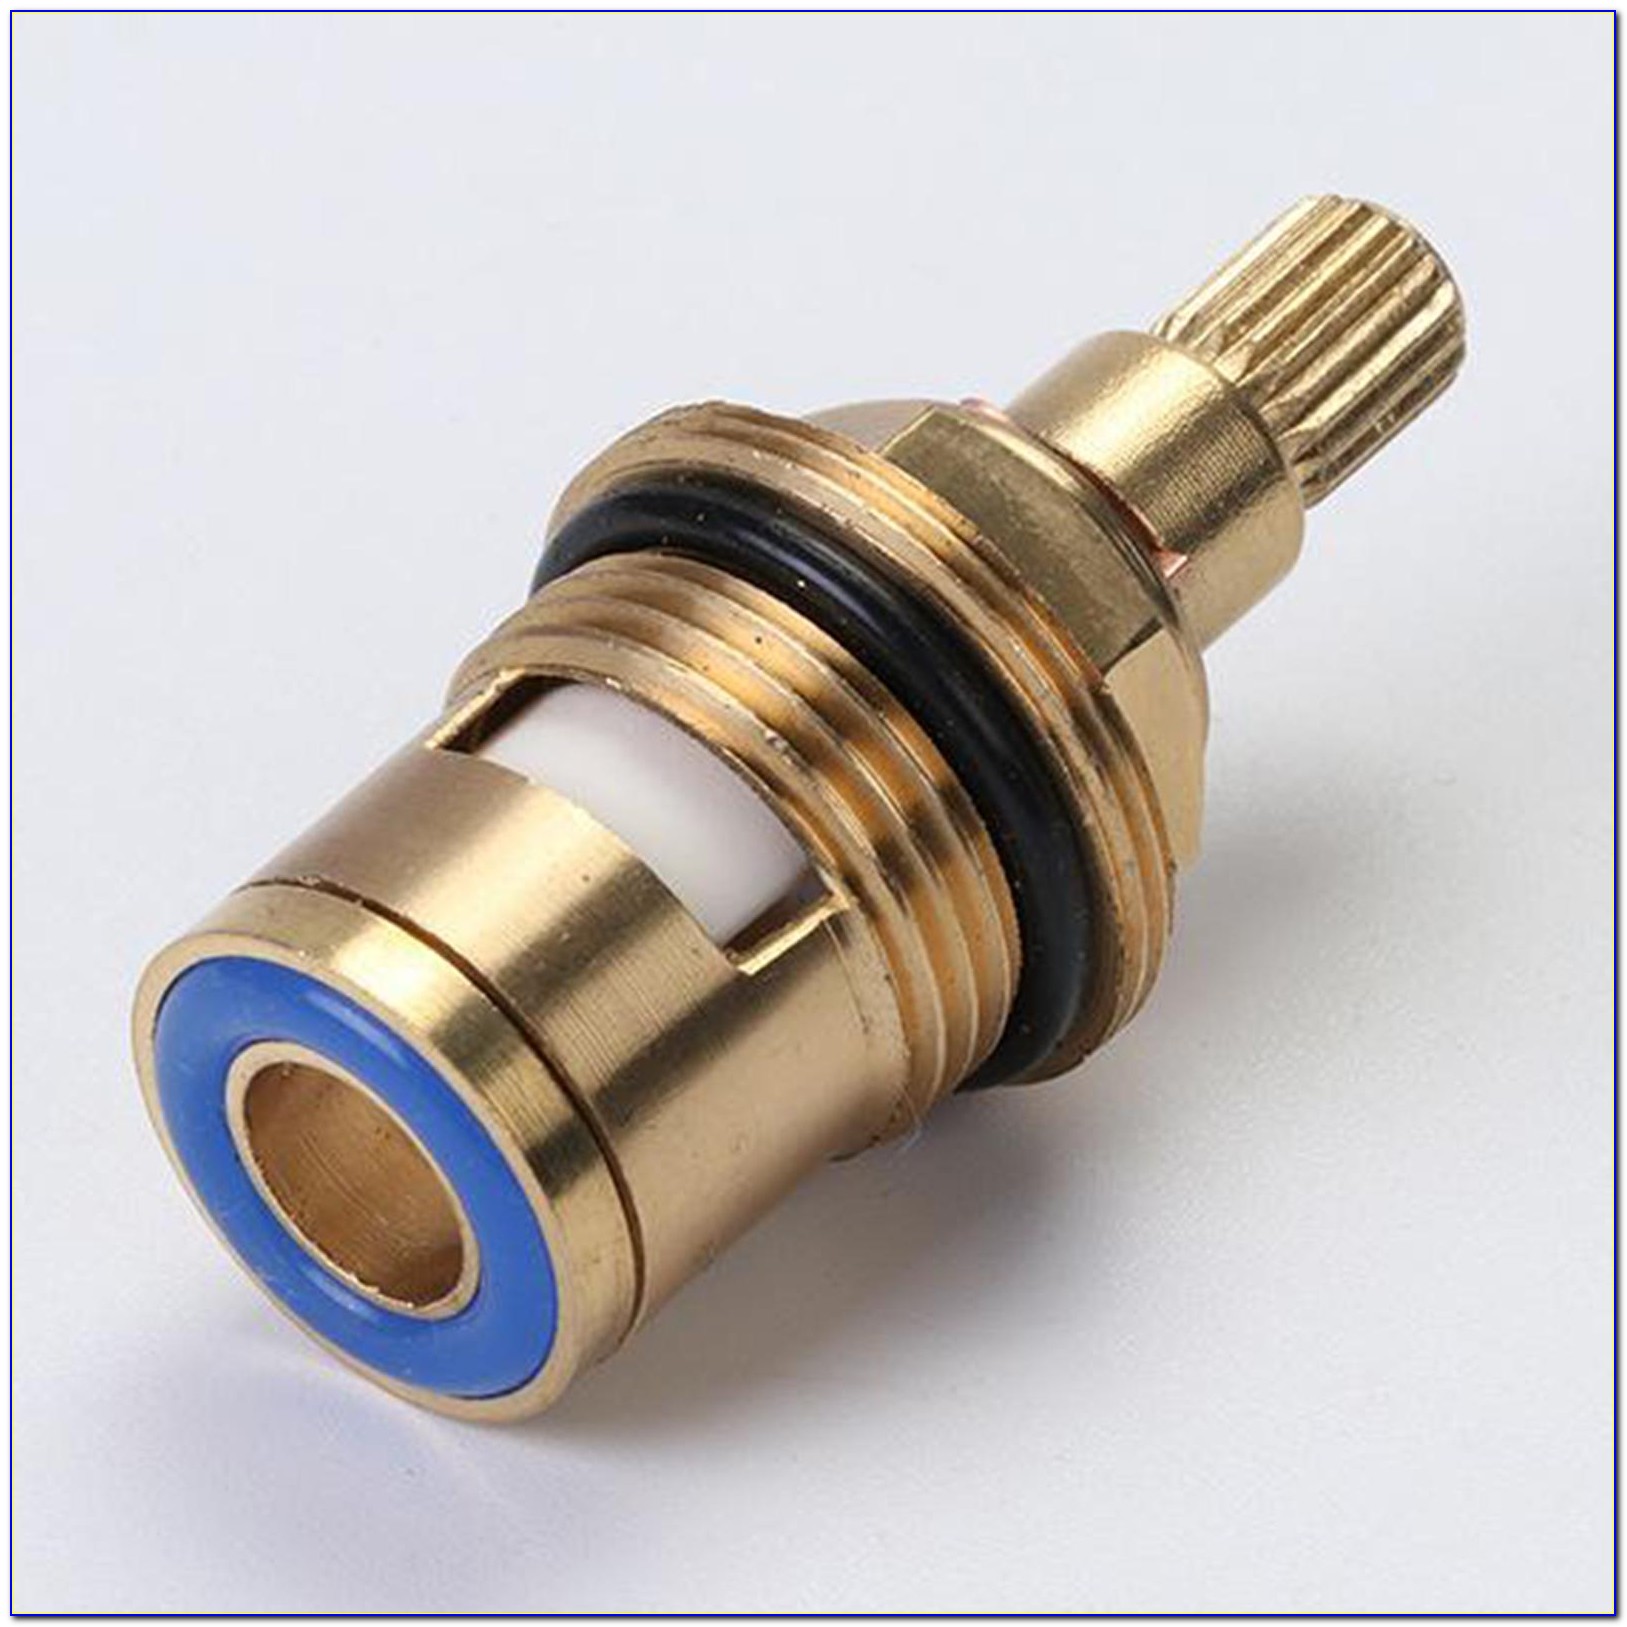 Faucet Cartridge Replacement Cost